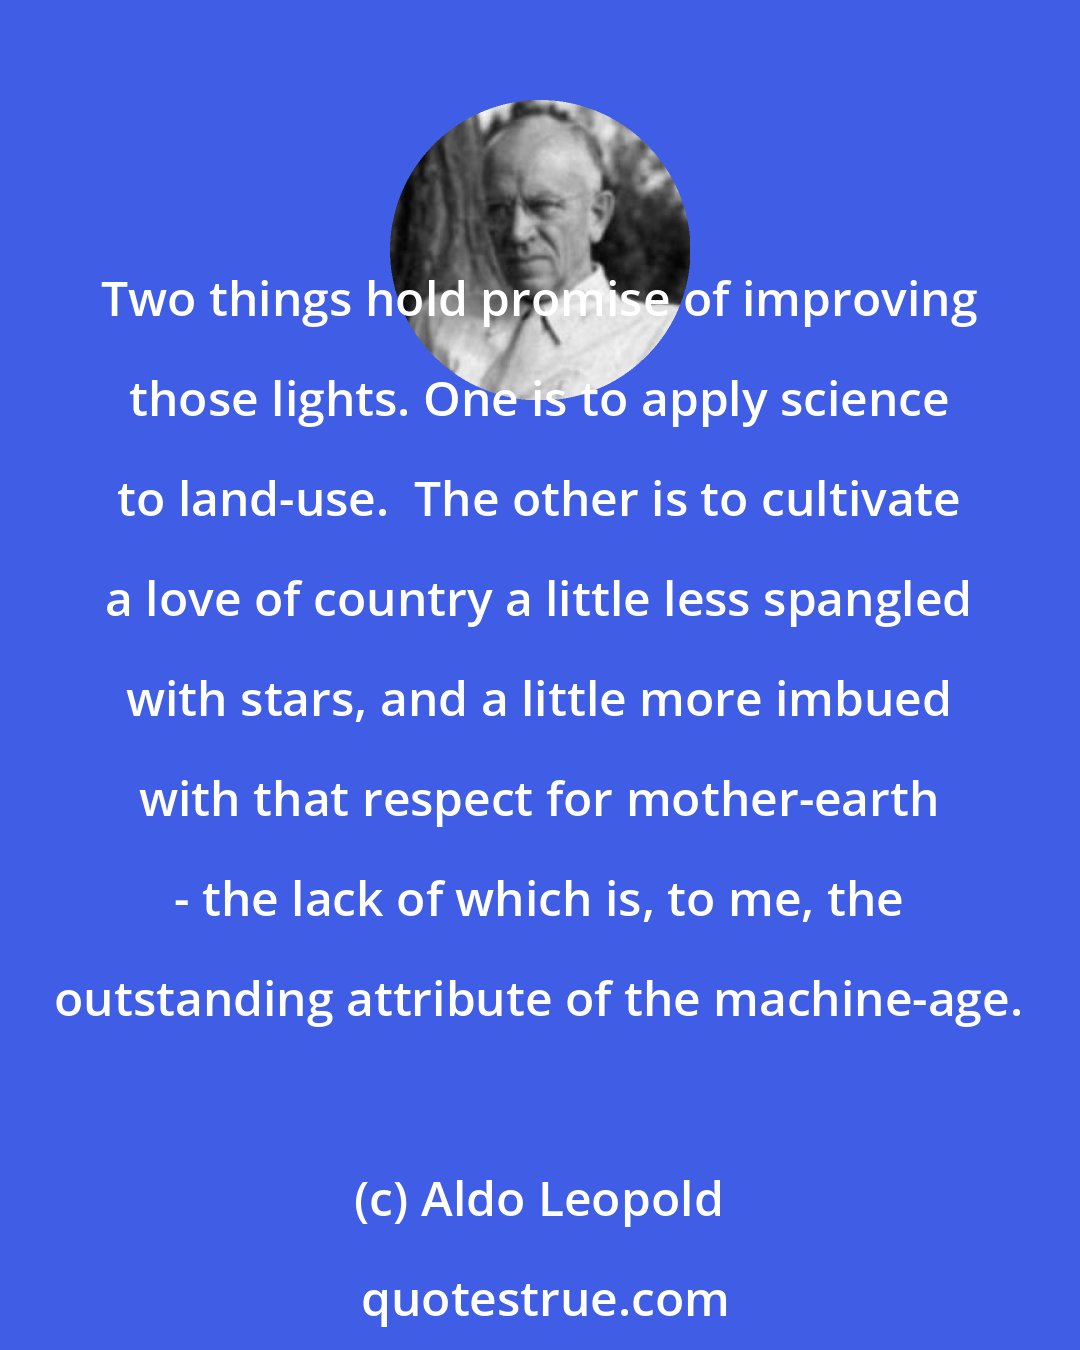 Aldo Leopold: Two things hold promise of improving those lights. One is to apply science to land-use.  The other is to cultivate a love of country a little less spangled with stars, and a little more imbued with that respect for mother-earth - the lack of which is, to me, the outstanding attribute of the machine-age.